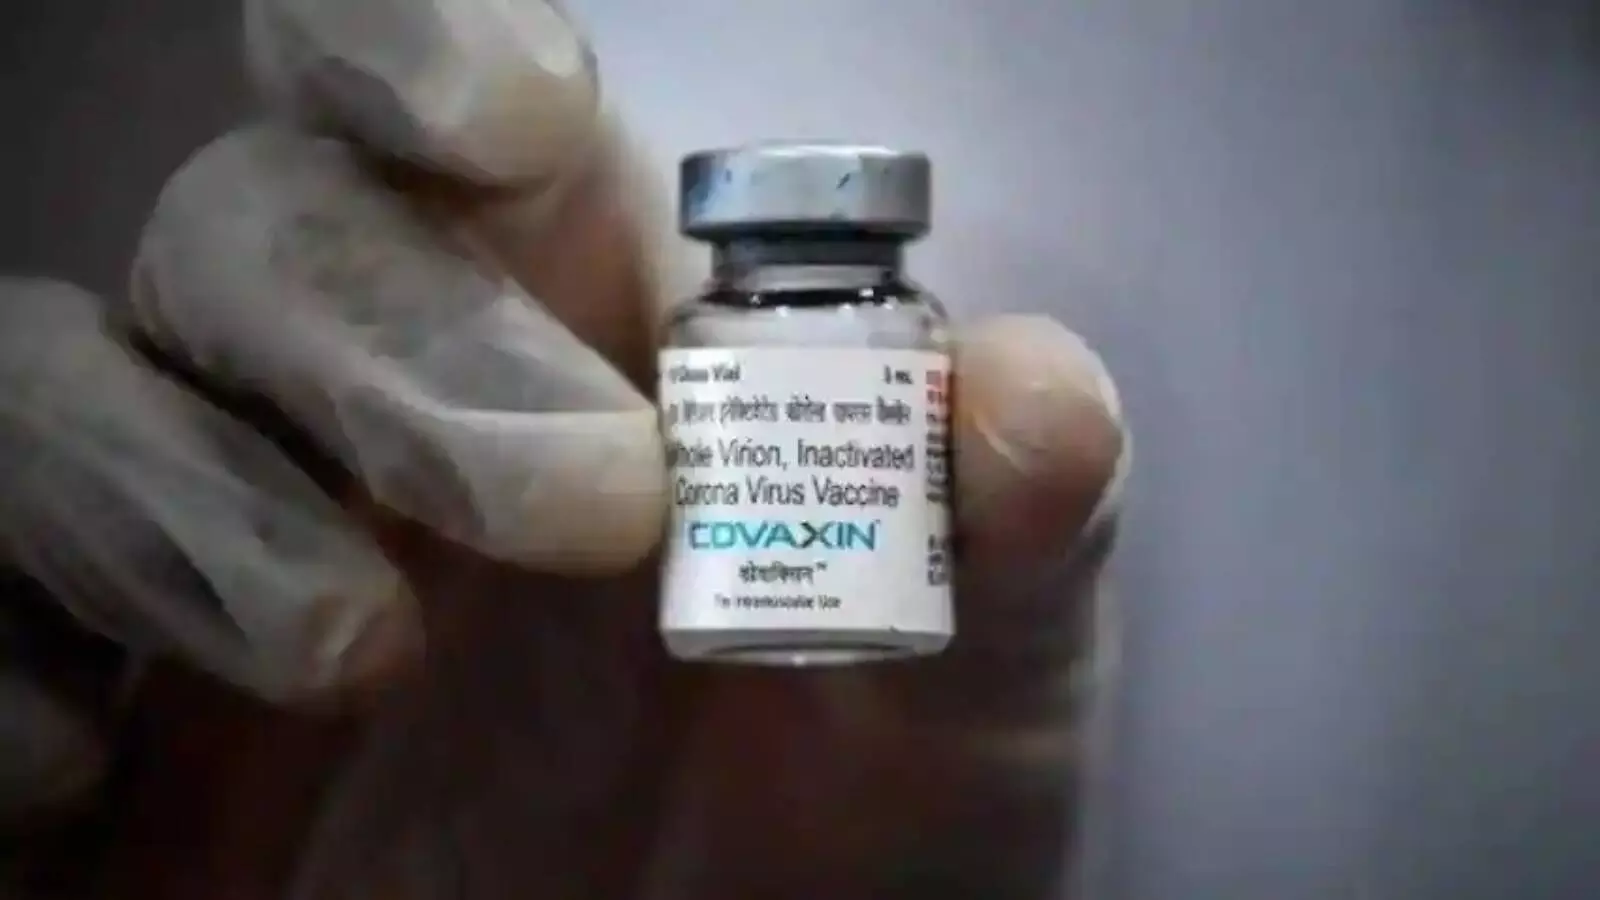 union health ministry and bharat biotech claims that no external pressure to rapidly develop covaxin